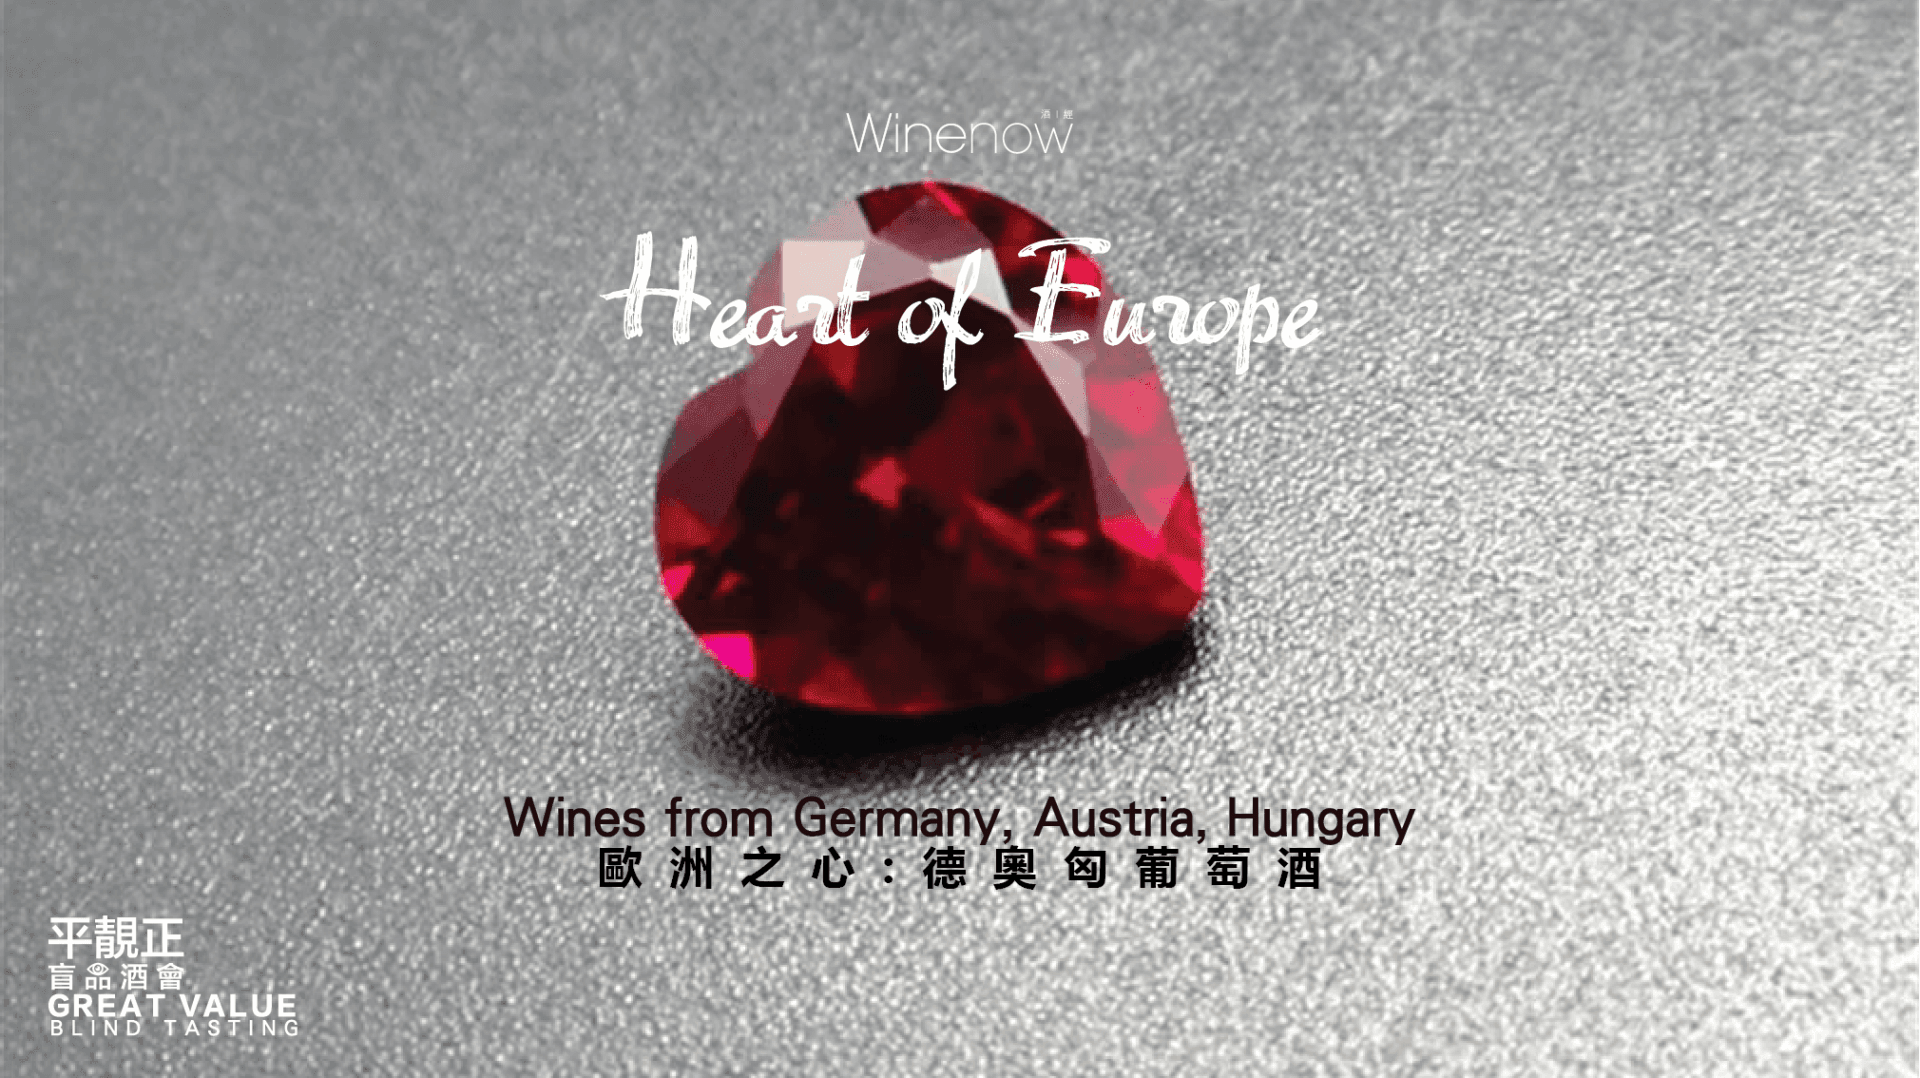 Great-Value Blind Tasting: Heart of Europe - WineNow